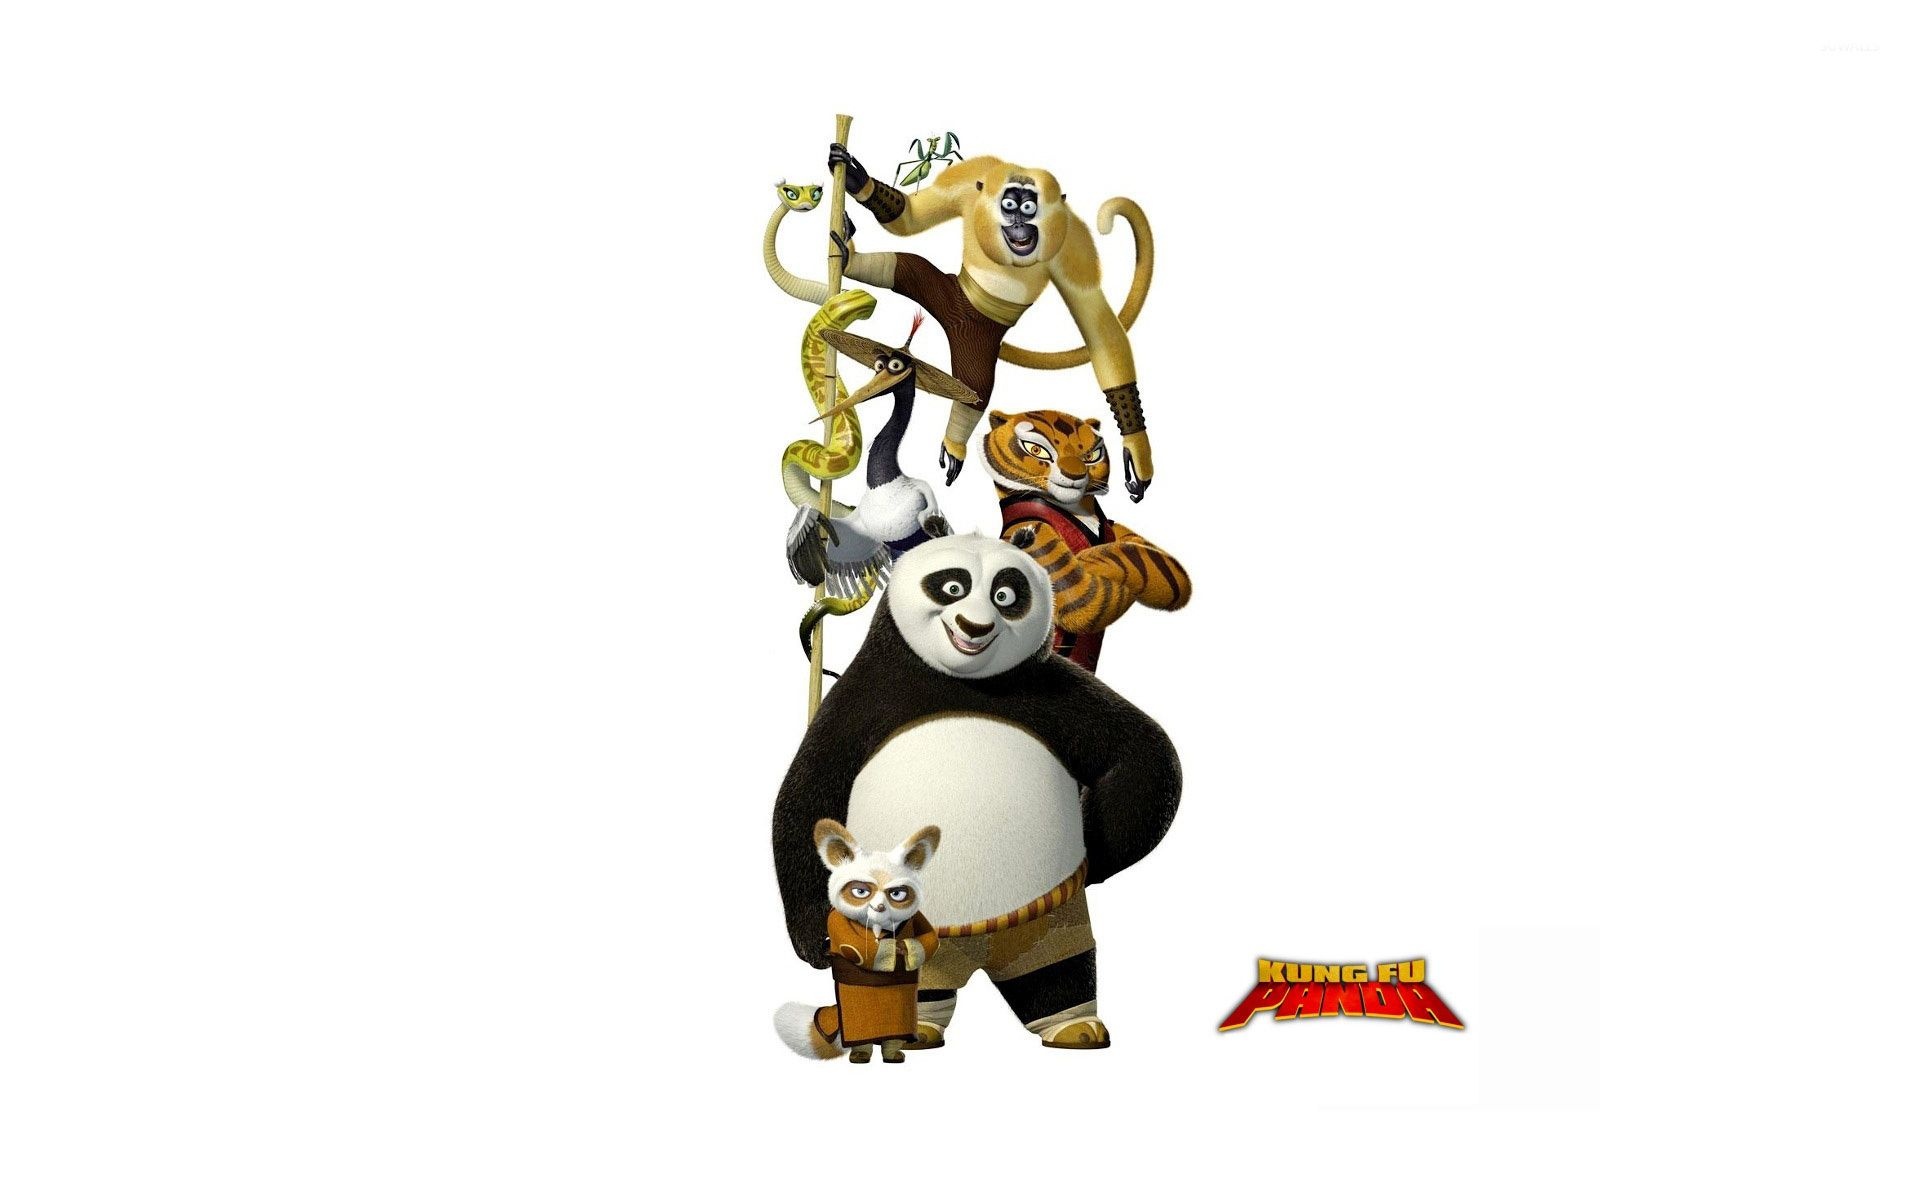 Master Shifu: Kung Fu Panda, Let go of his bitterness and attained inner peace. 1920x1200 HD Wallpaper.